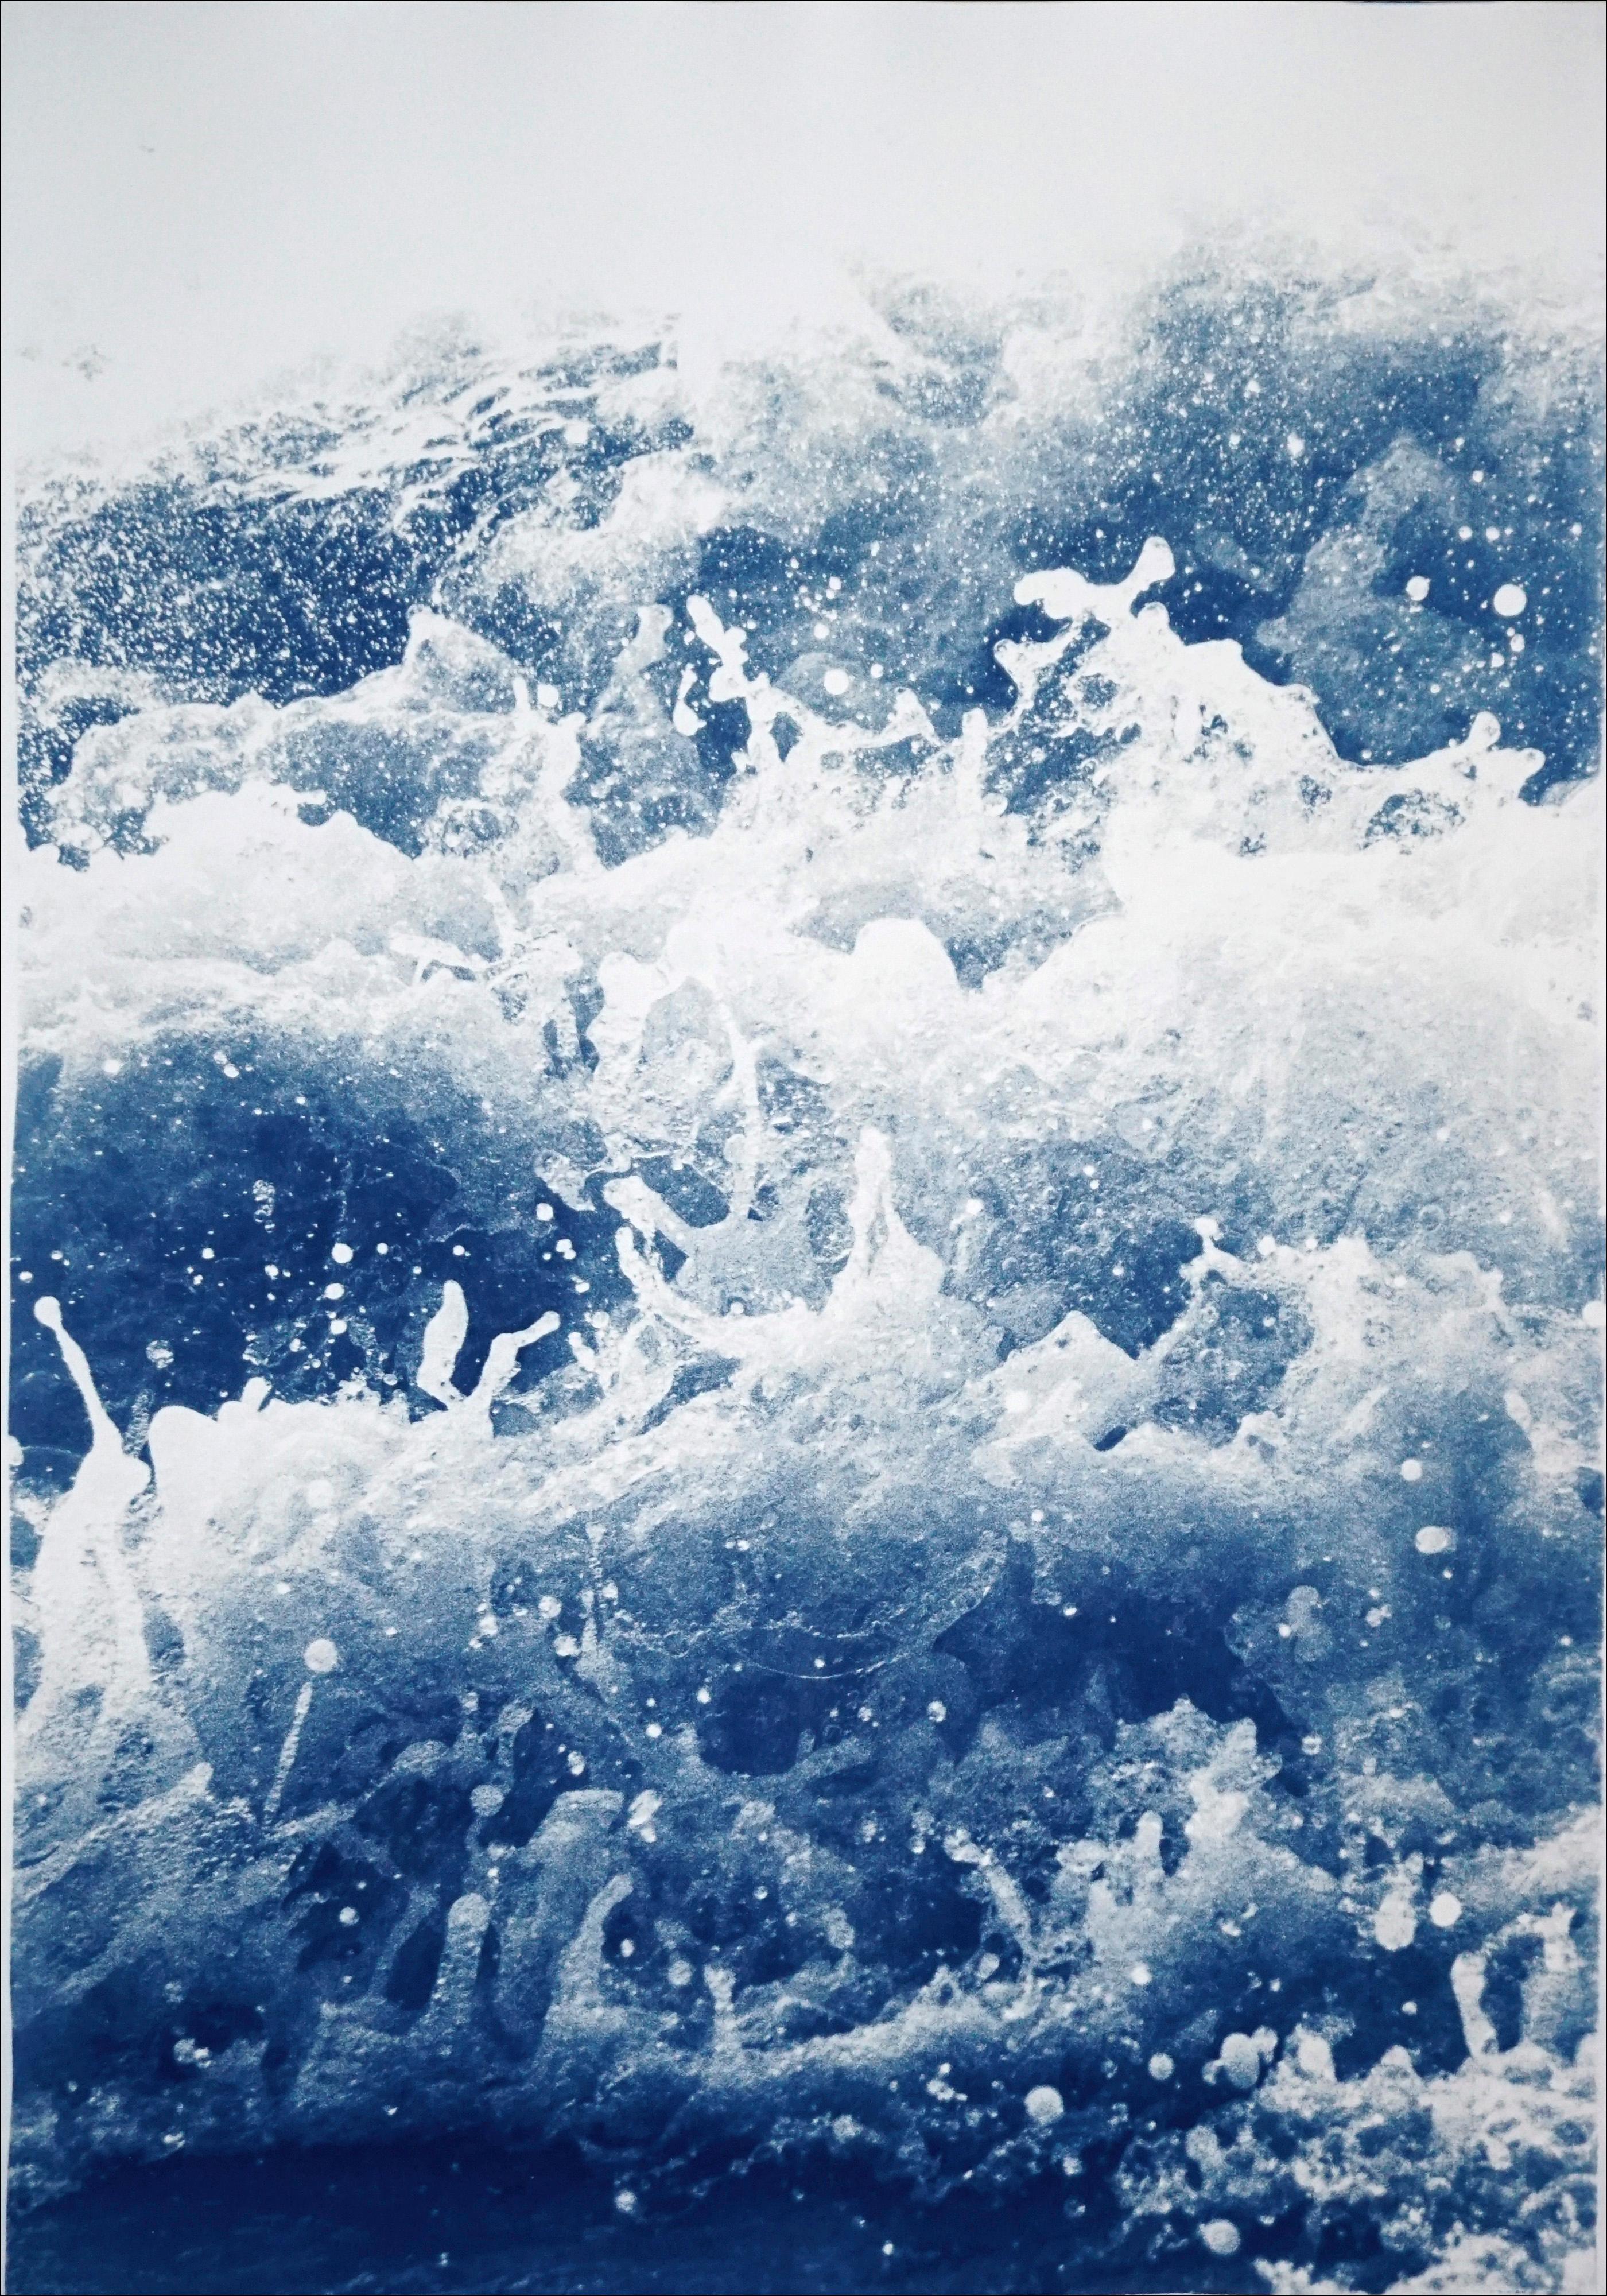 Tempestuous Tidal in Blue, Stormy Seascape Diptych, Duo Handmade Cyanotype Print - Realist Art by Kind of Cyan